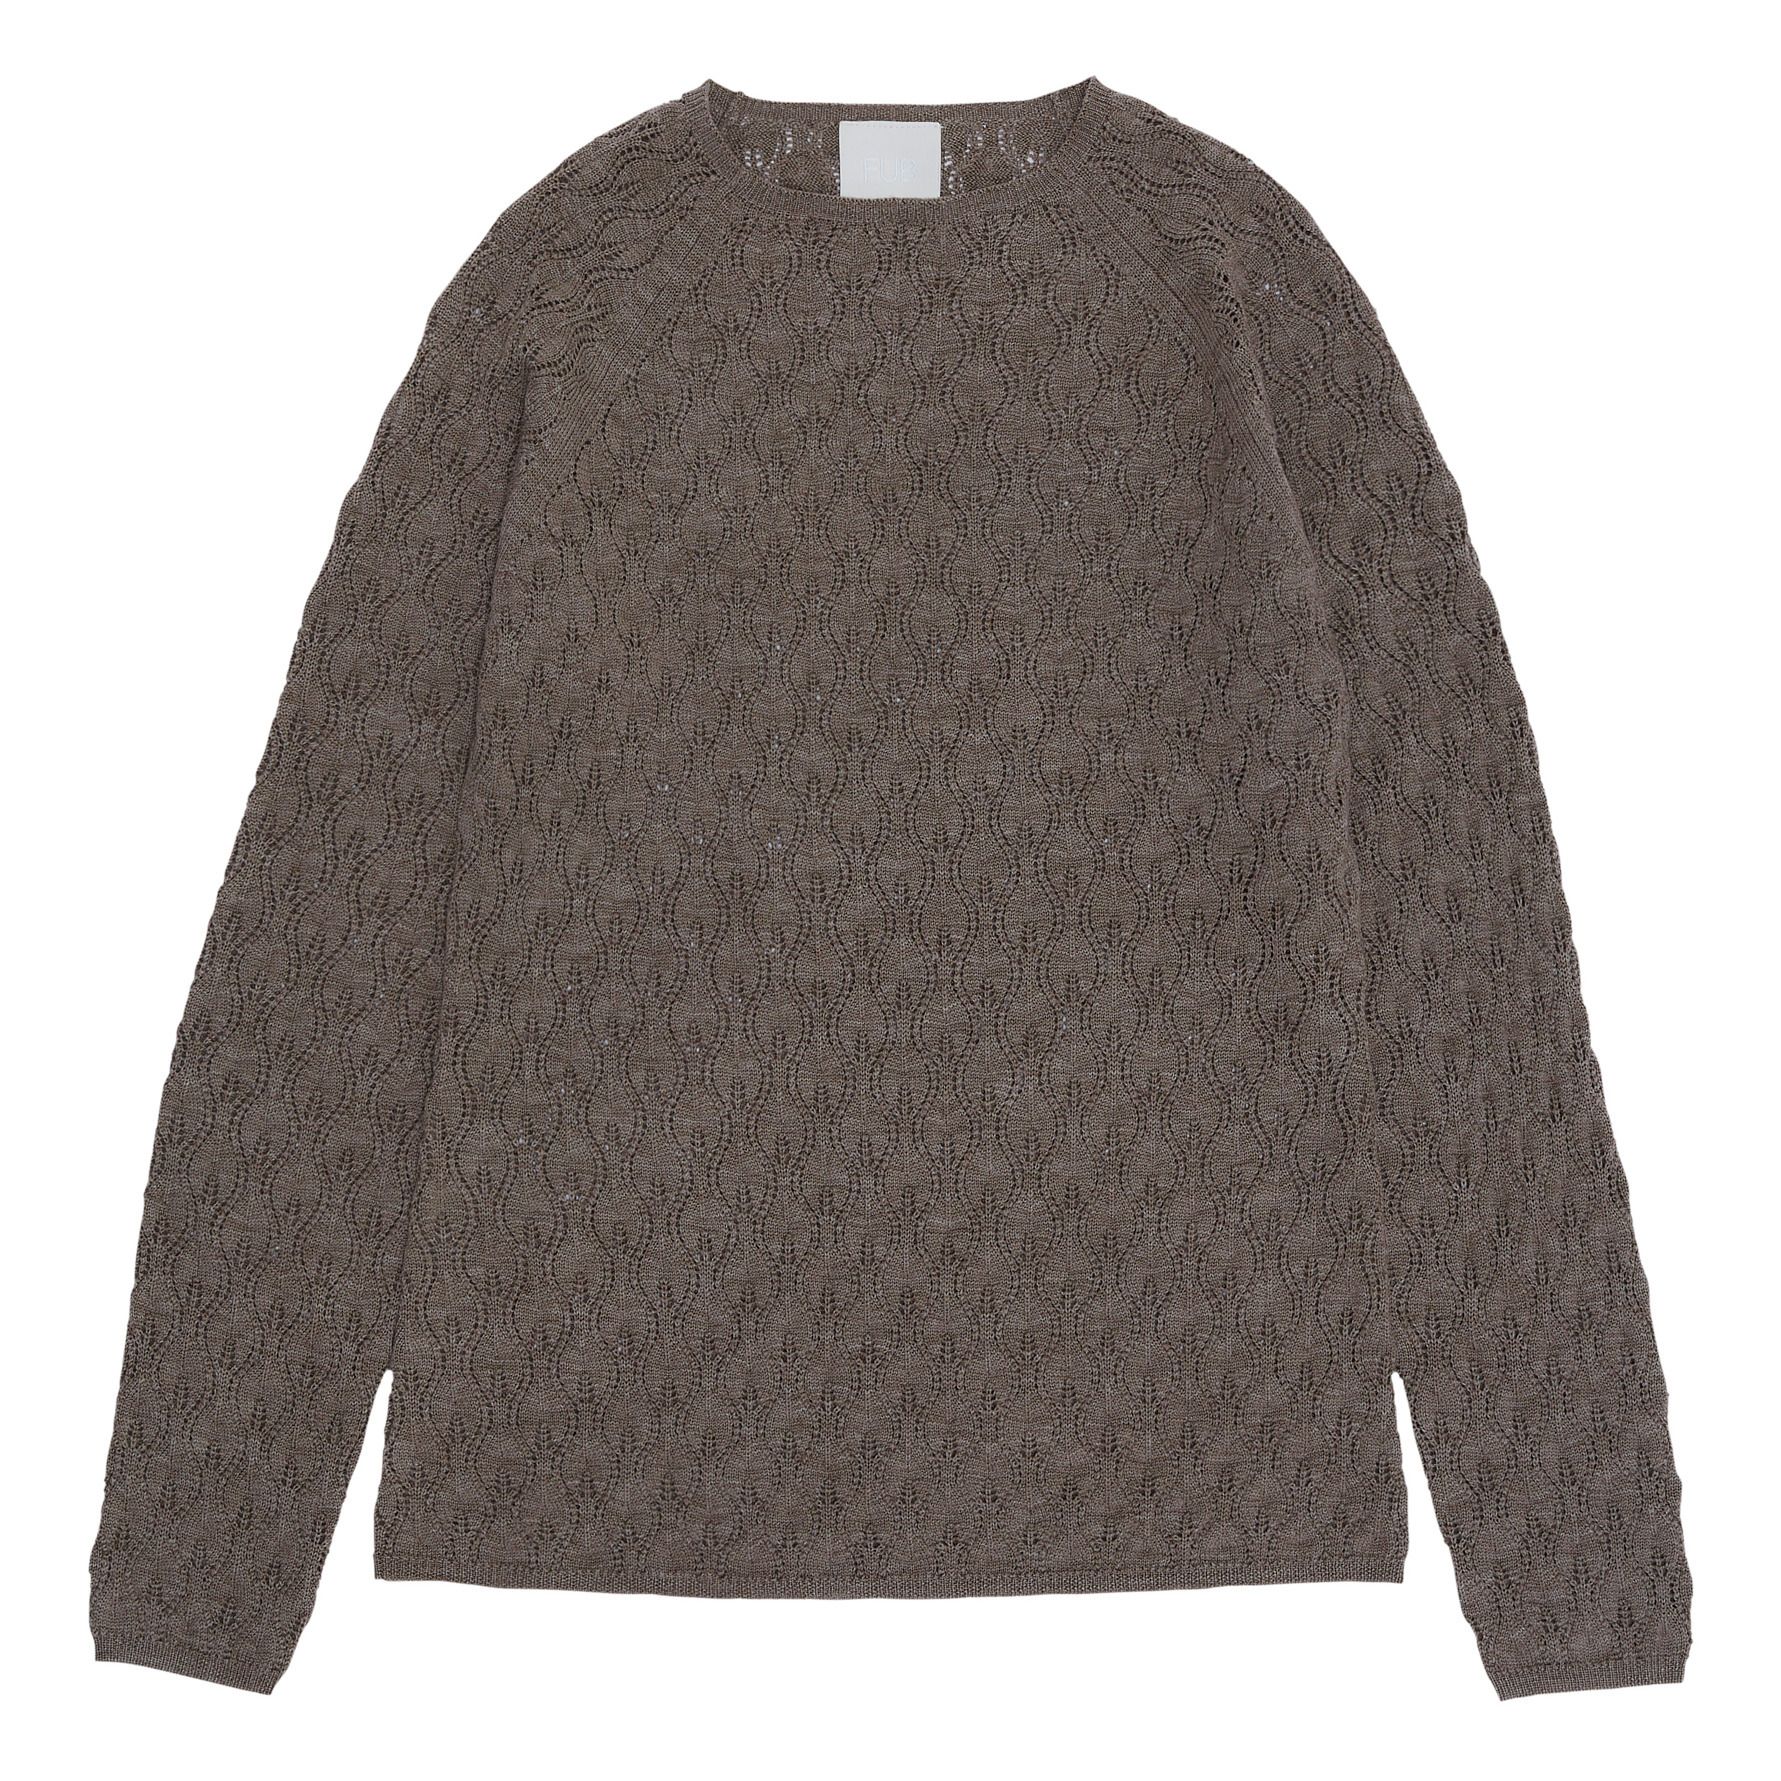 FUB - Pull Laine Fine -Collection Femme- - Gris taupe